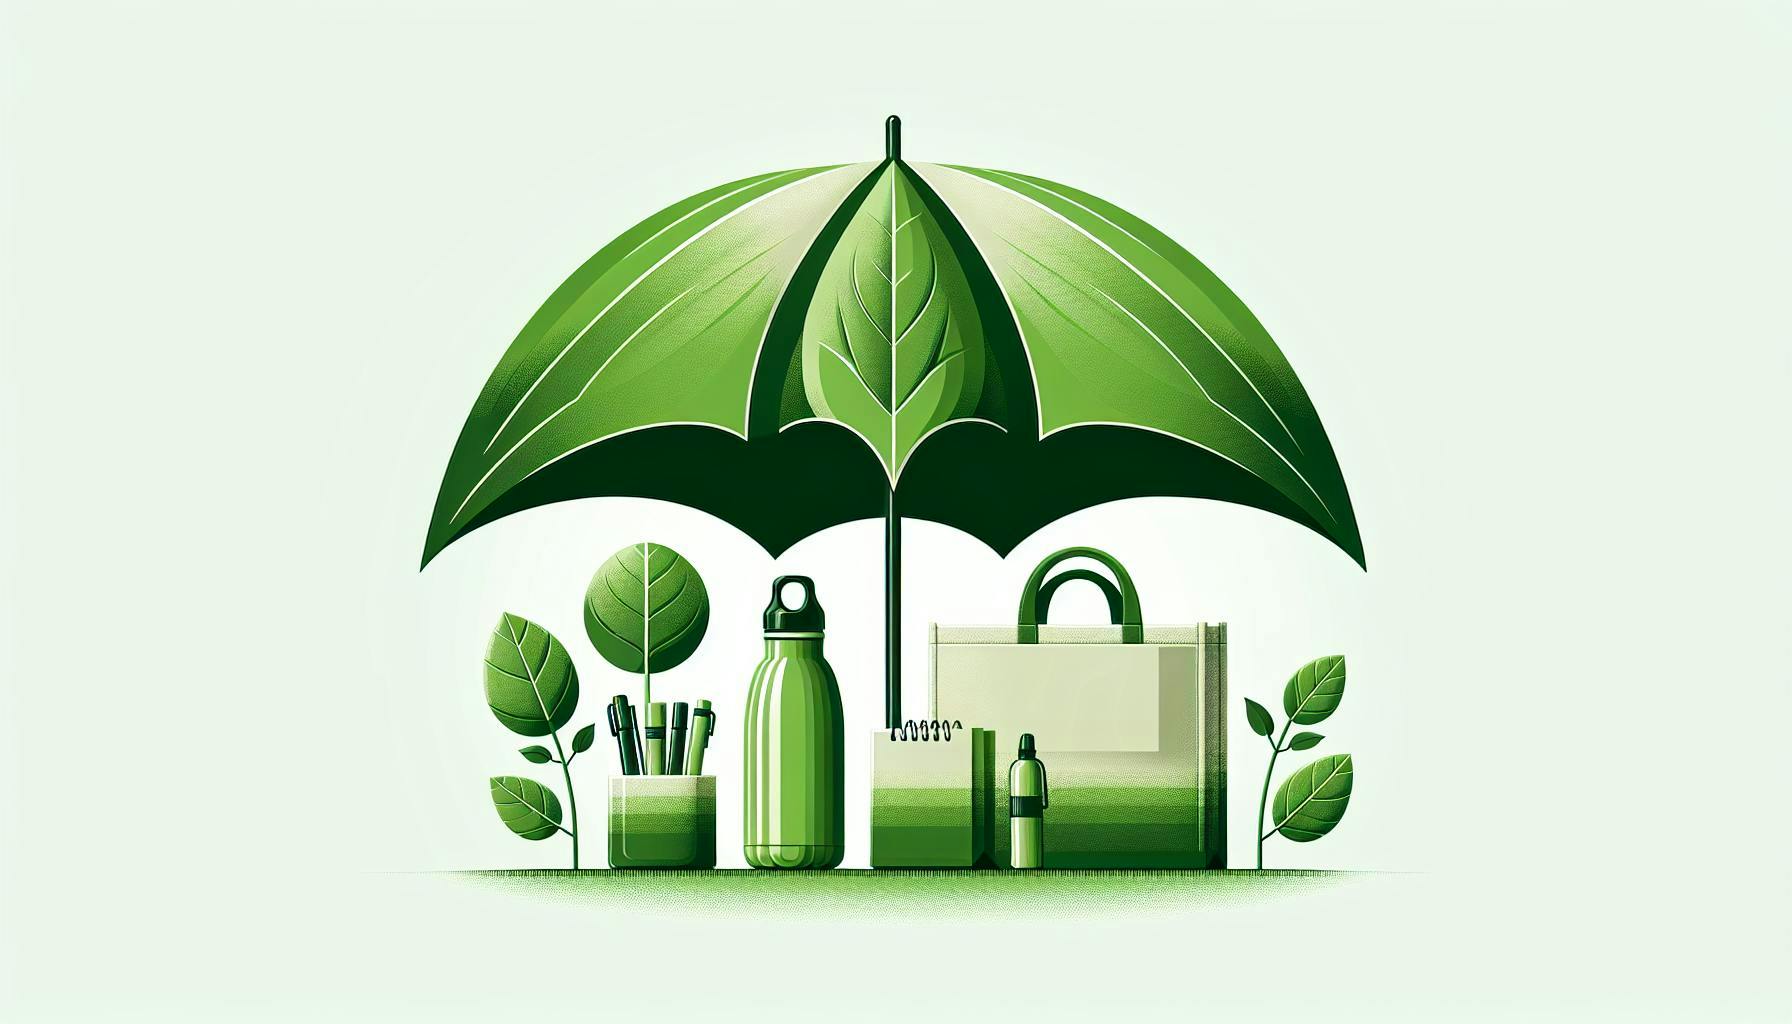 Wholesale Promotional Products: Eco-Friendly Options